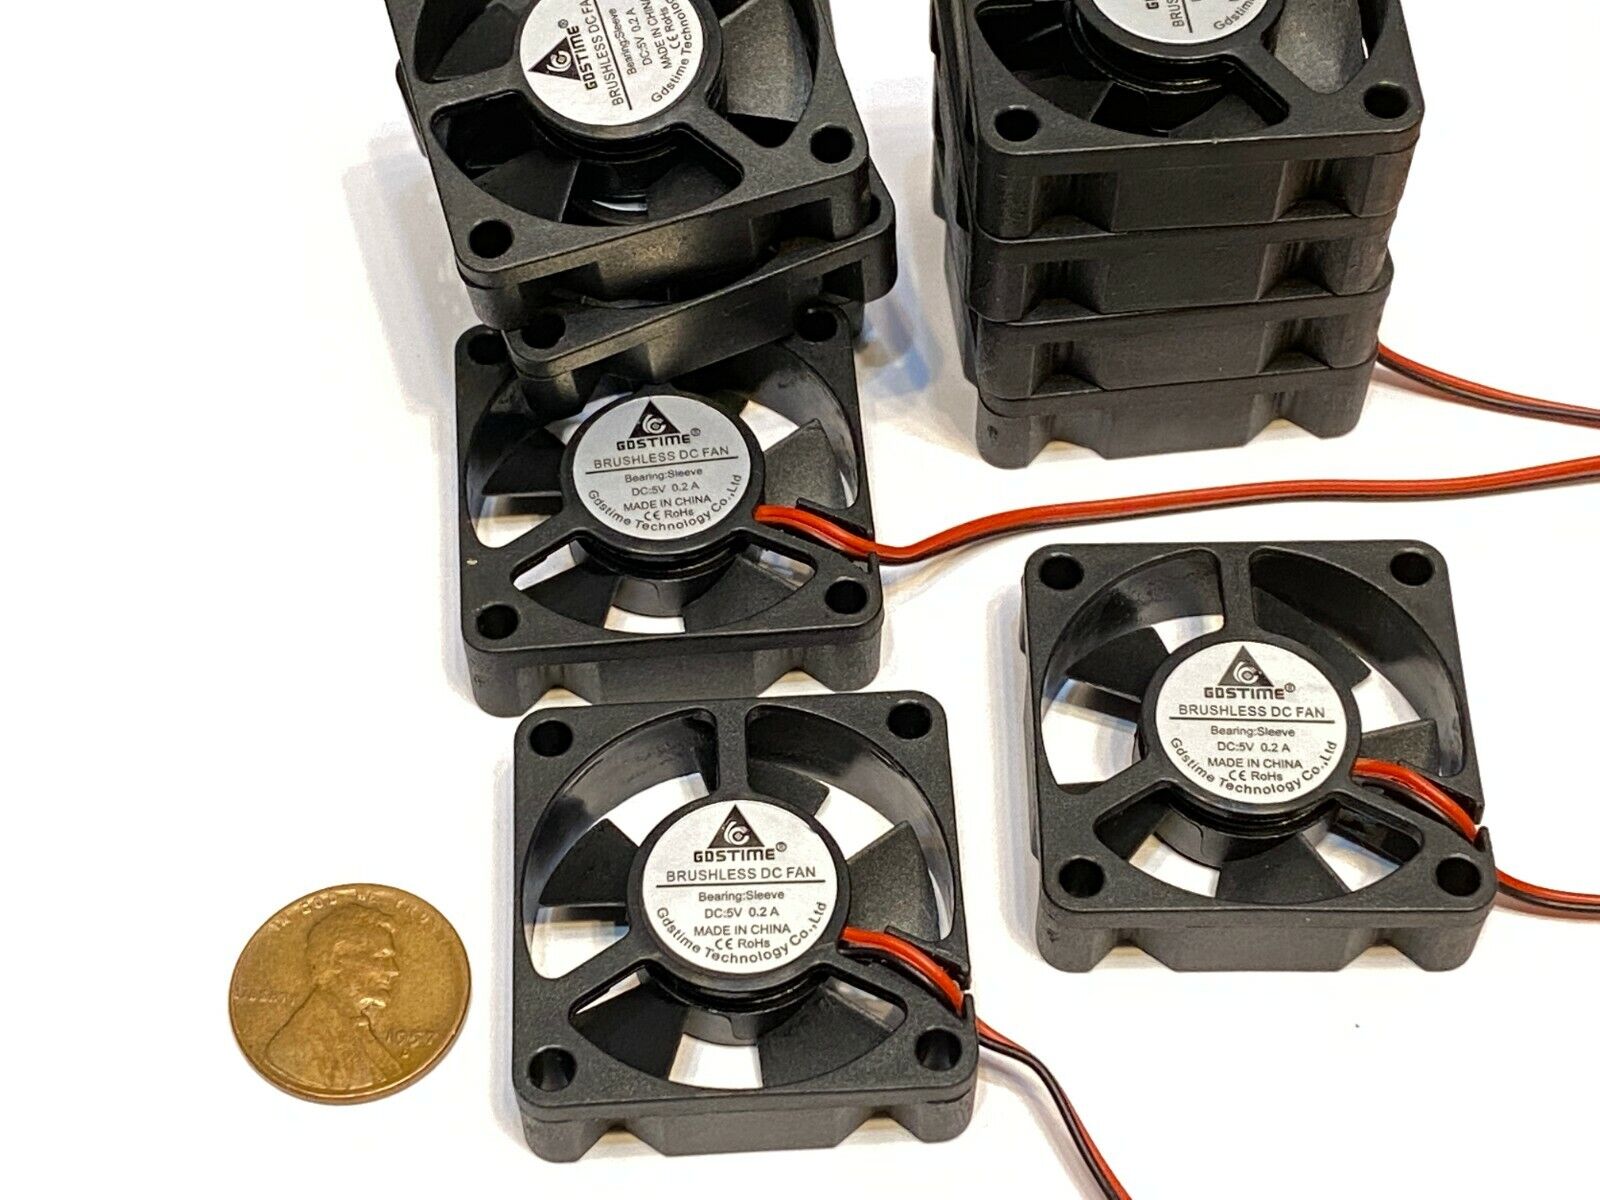 10 Pieces 5v fan 35mm x 10mm mini small cooling  2pin GDStime  3cm